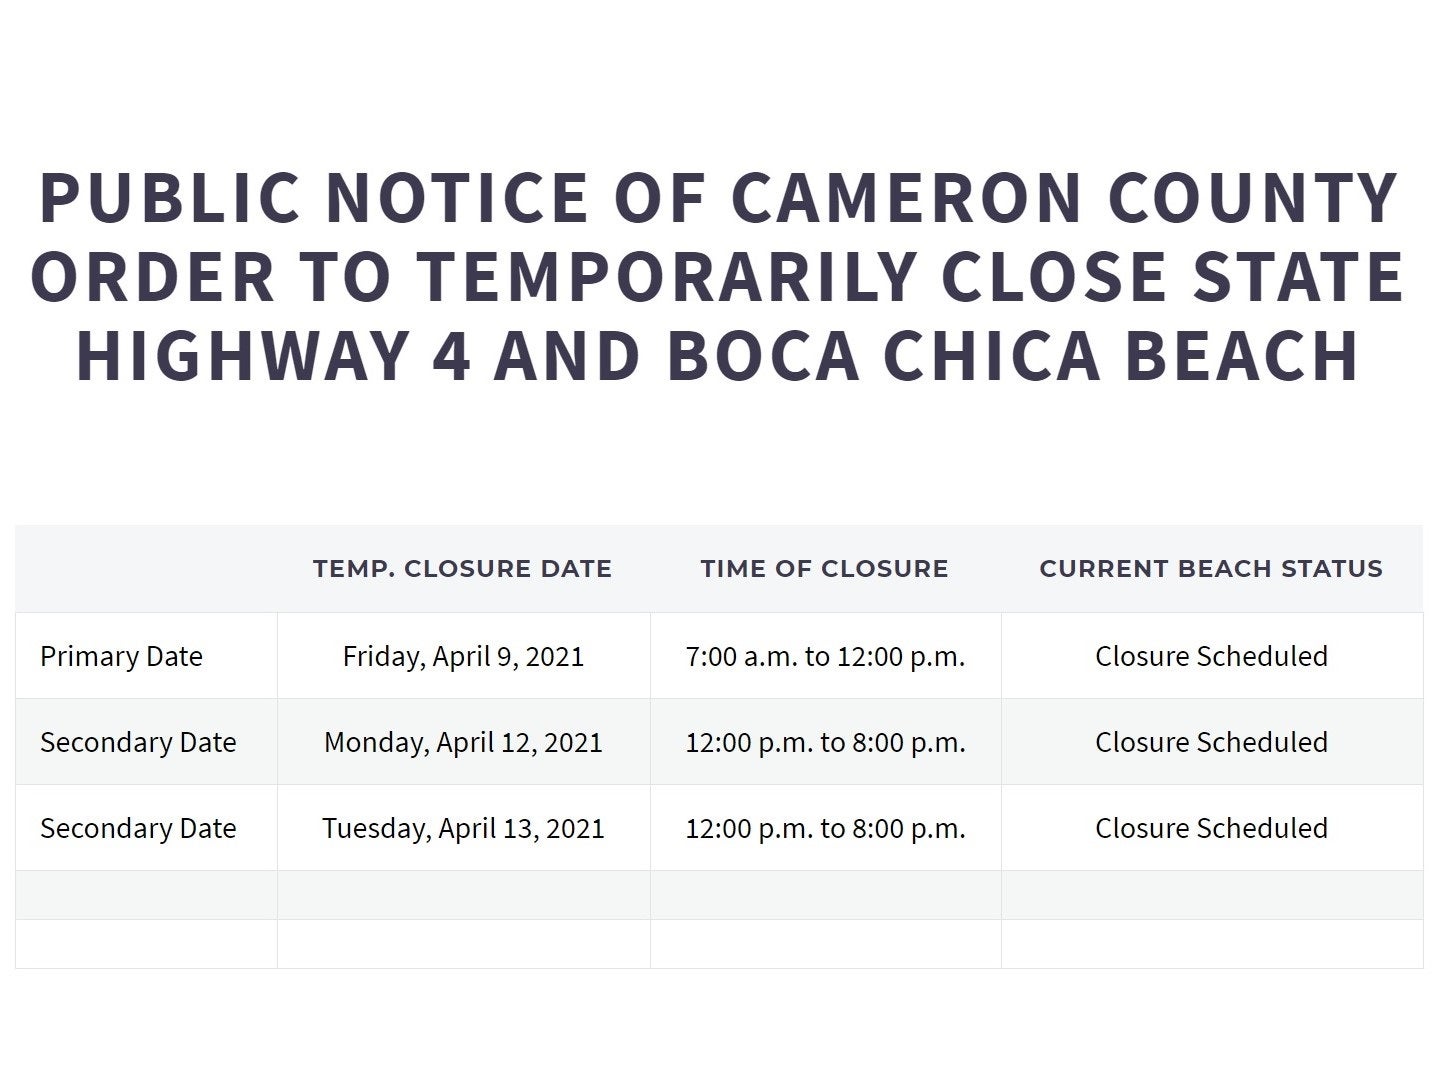 Road closures have been scheduled for Highay 4 and Boca Chica Beach in Cameron County